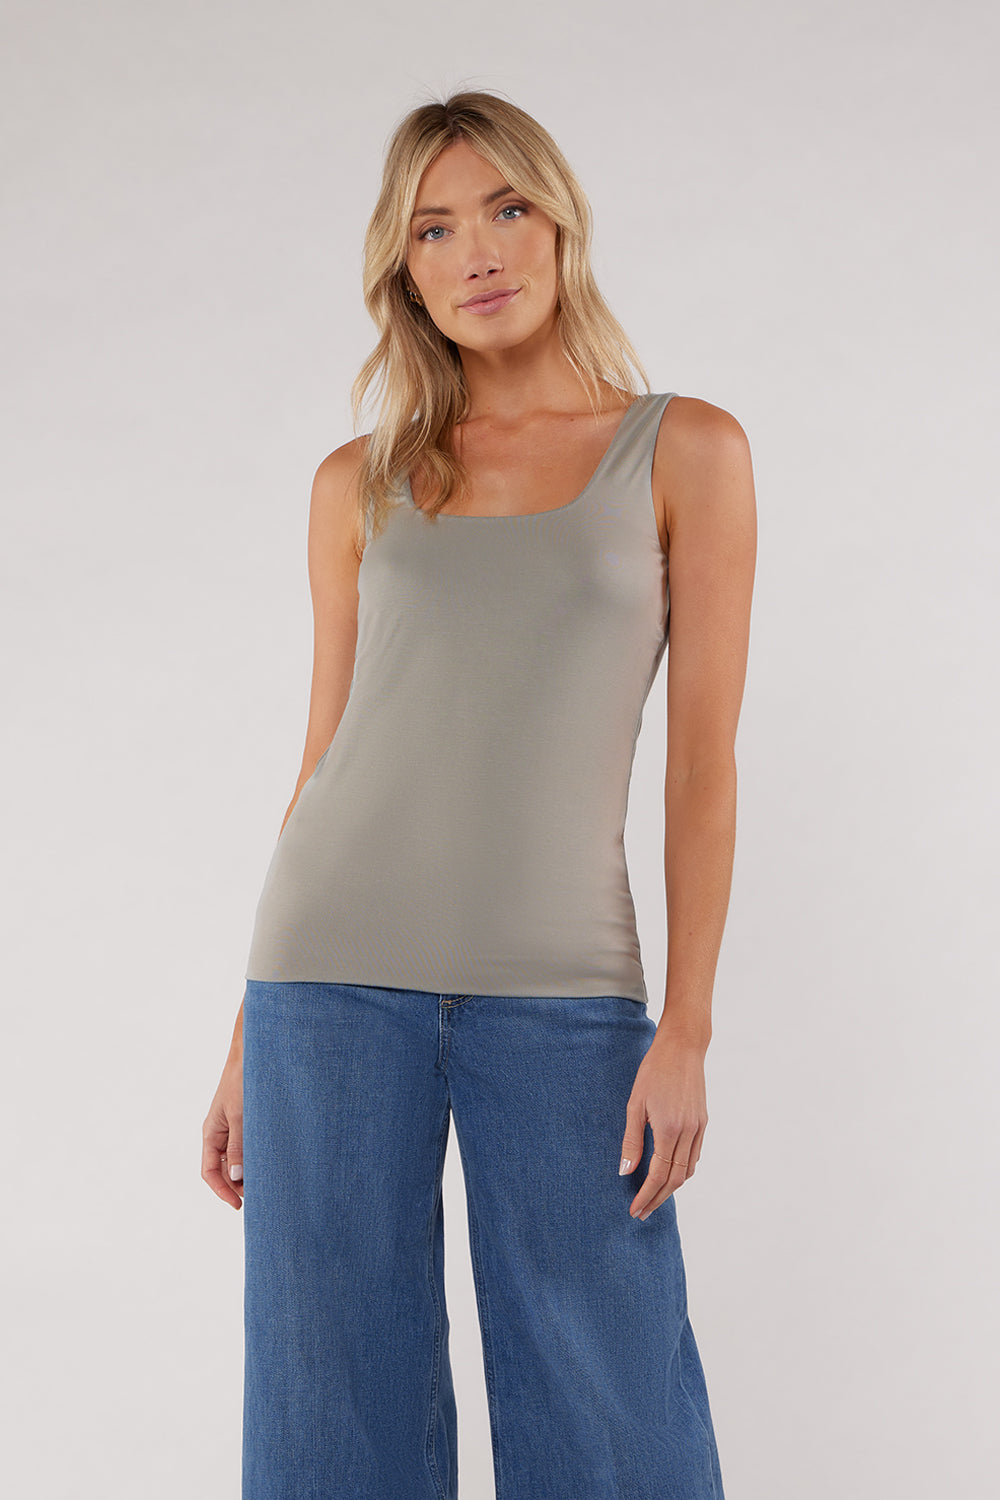 CALLIE SQUARE NECK TANK - DUSTY-OLIVE